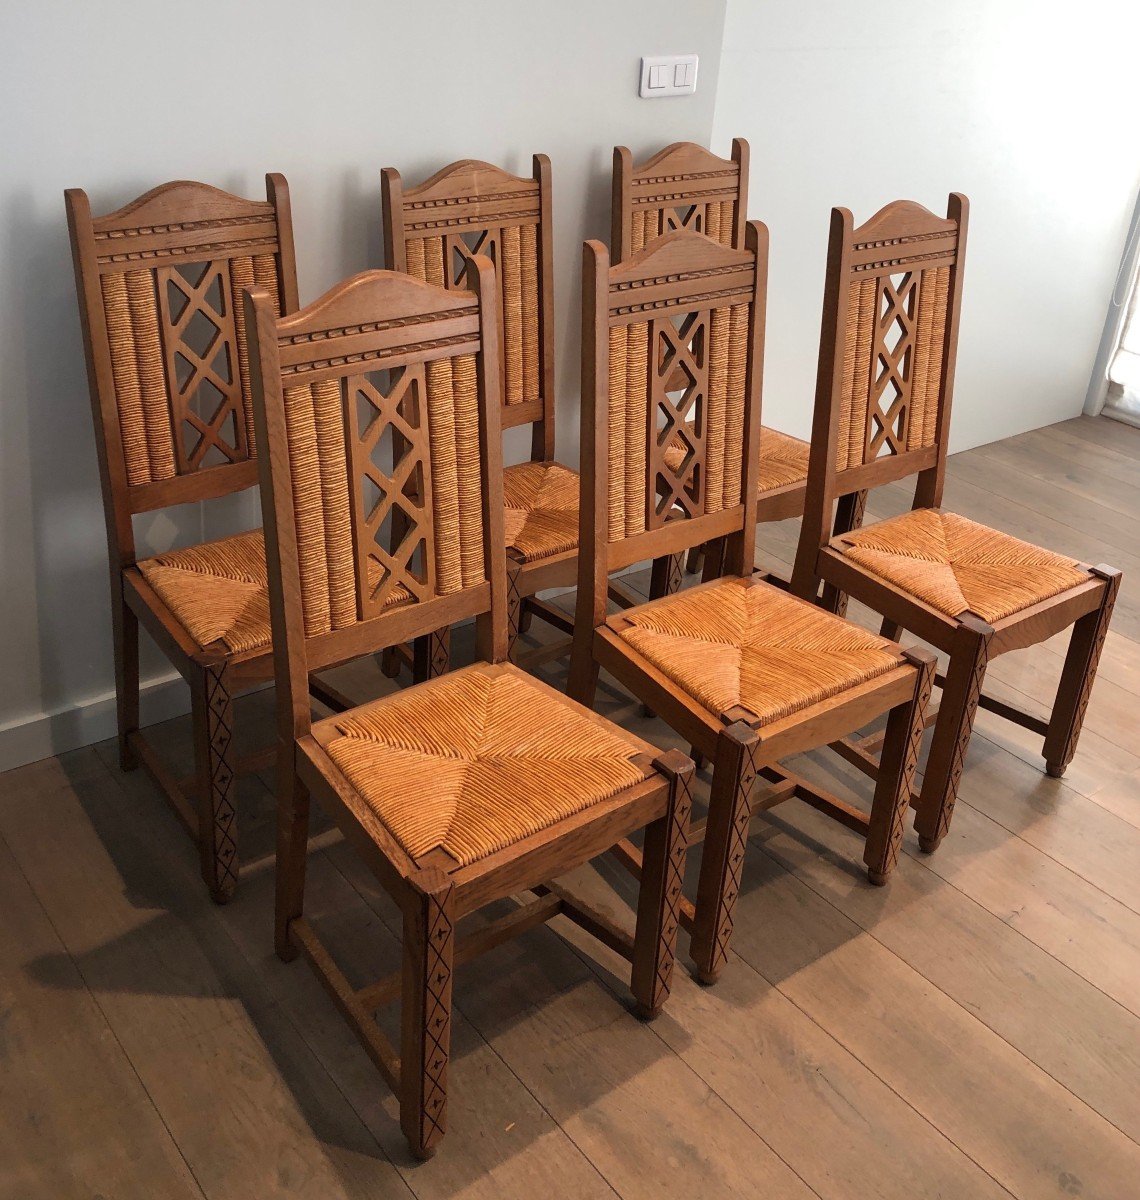 Set Of 6 Brutalist Chairs Made Of Ash And Straw. French Work, Circa 1950